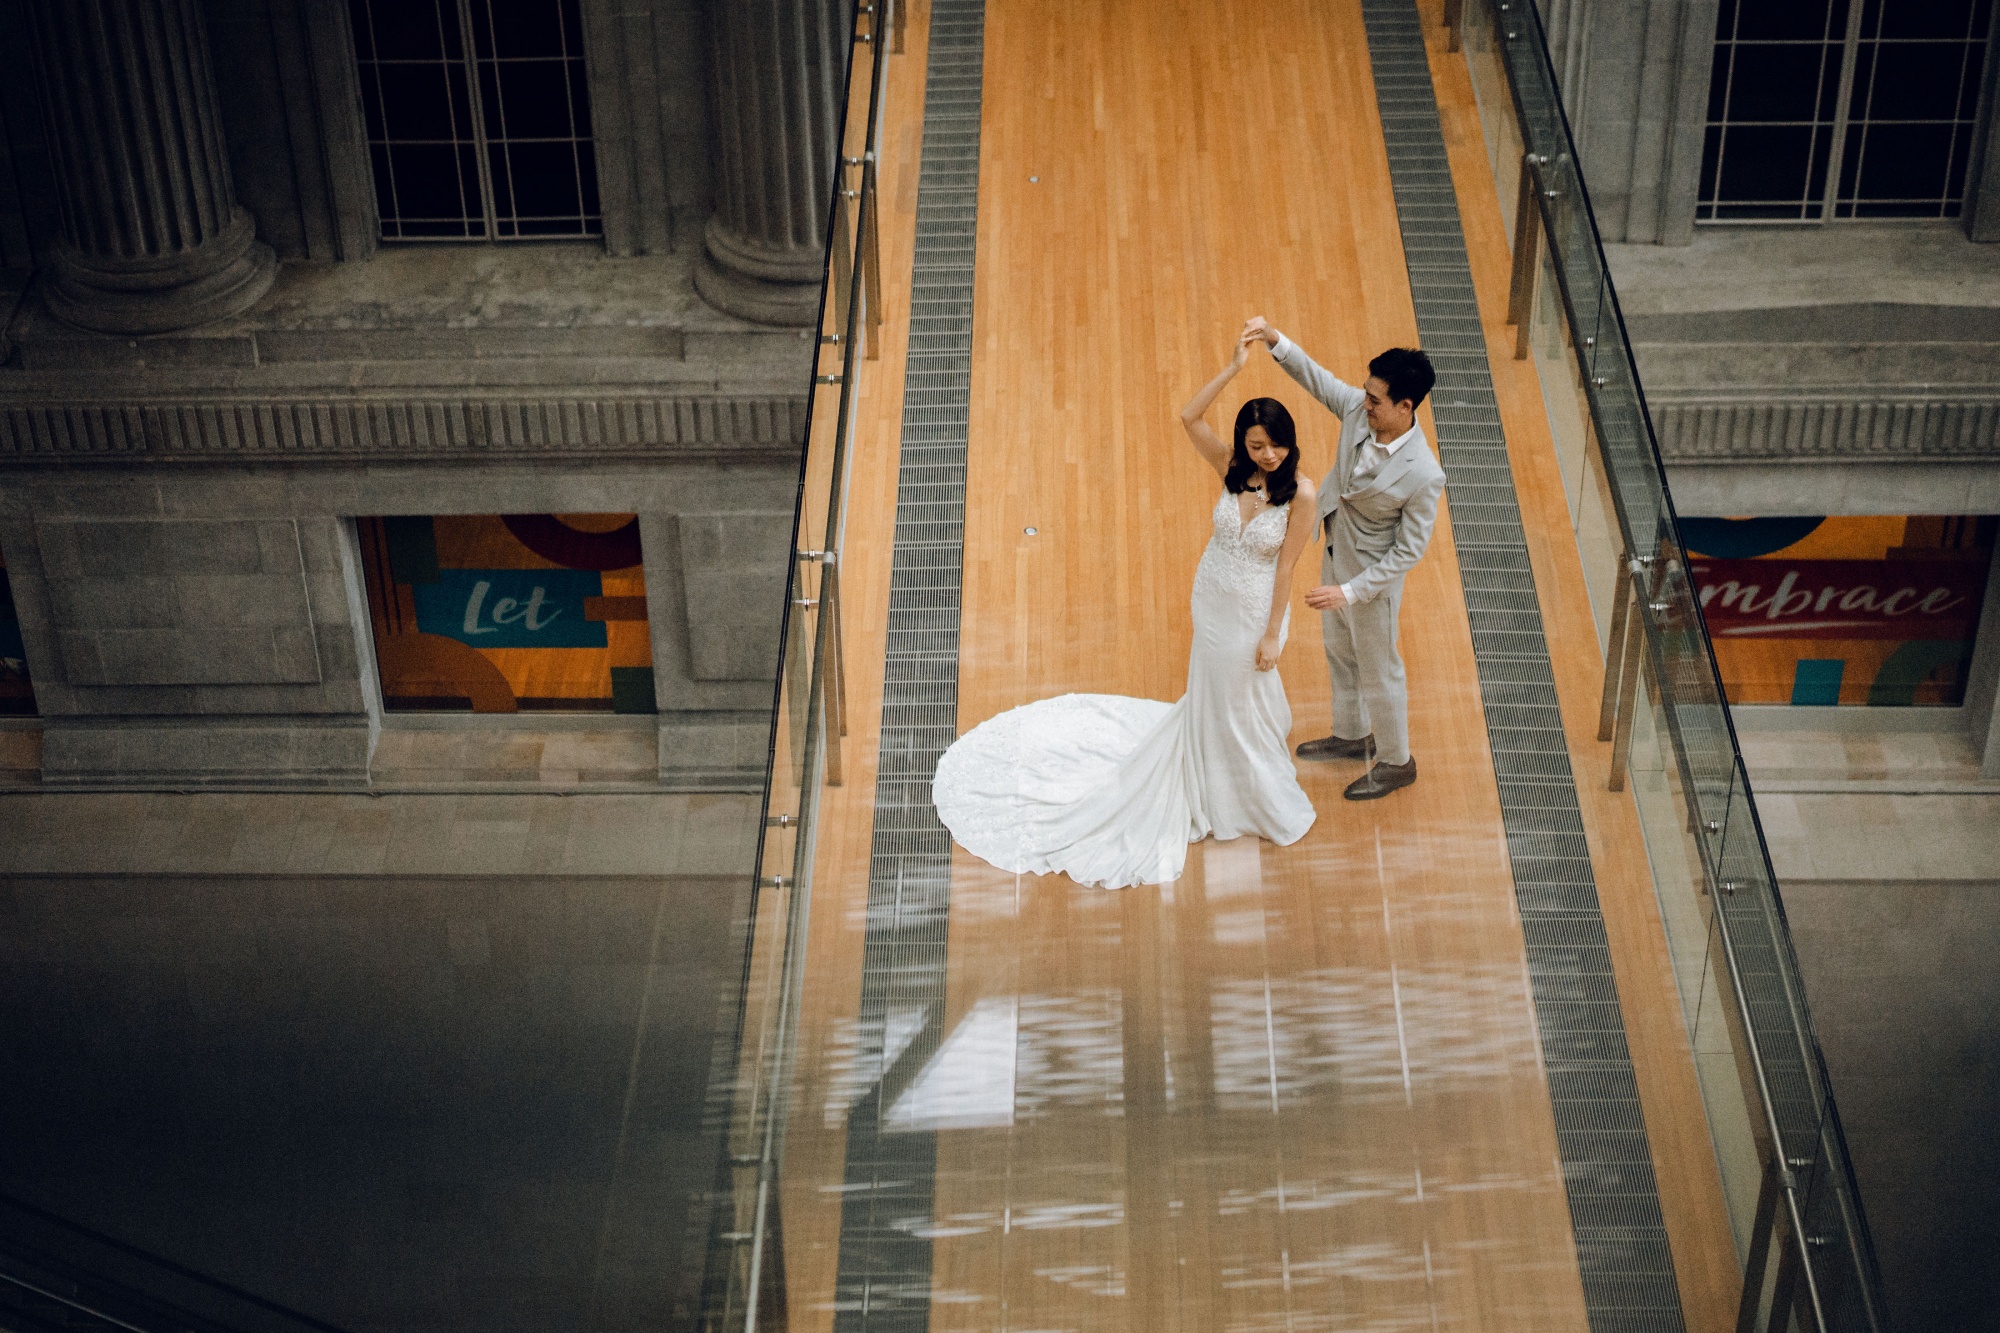 Prewedding Photoshoot At National Gallery And Armenian Street Carpet Shop by Samantha on OneThreeOneFour 10